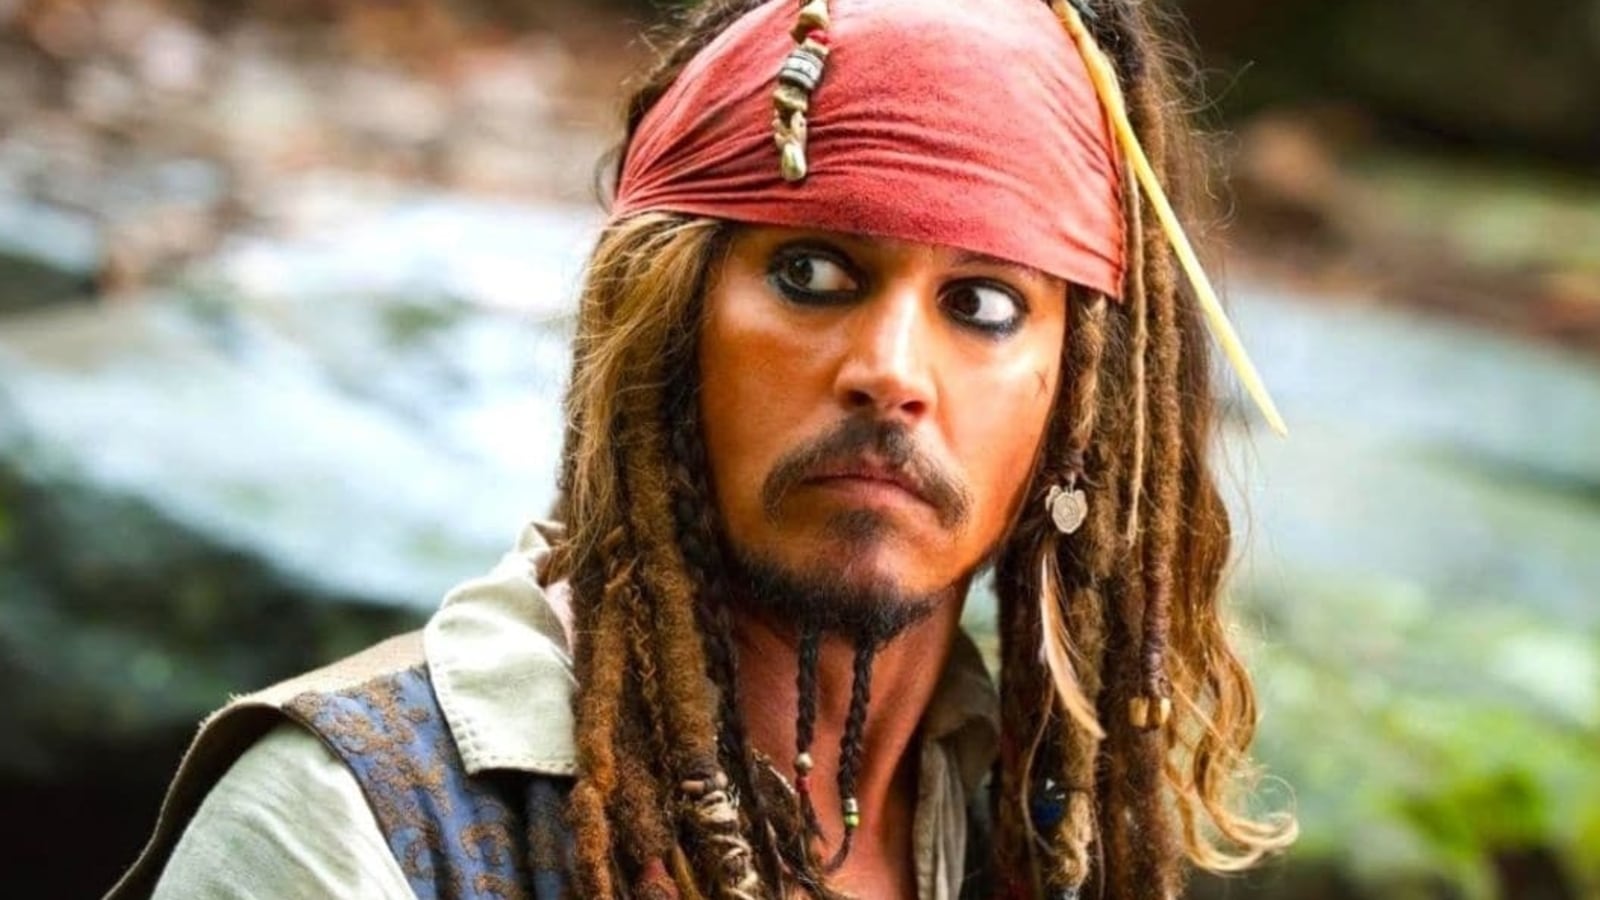 Johnny Depp transforms into Jack Sparrow for fans outside